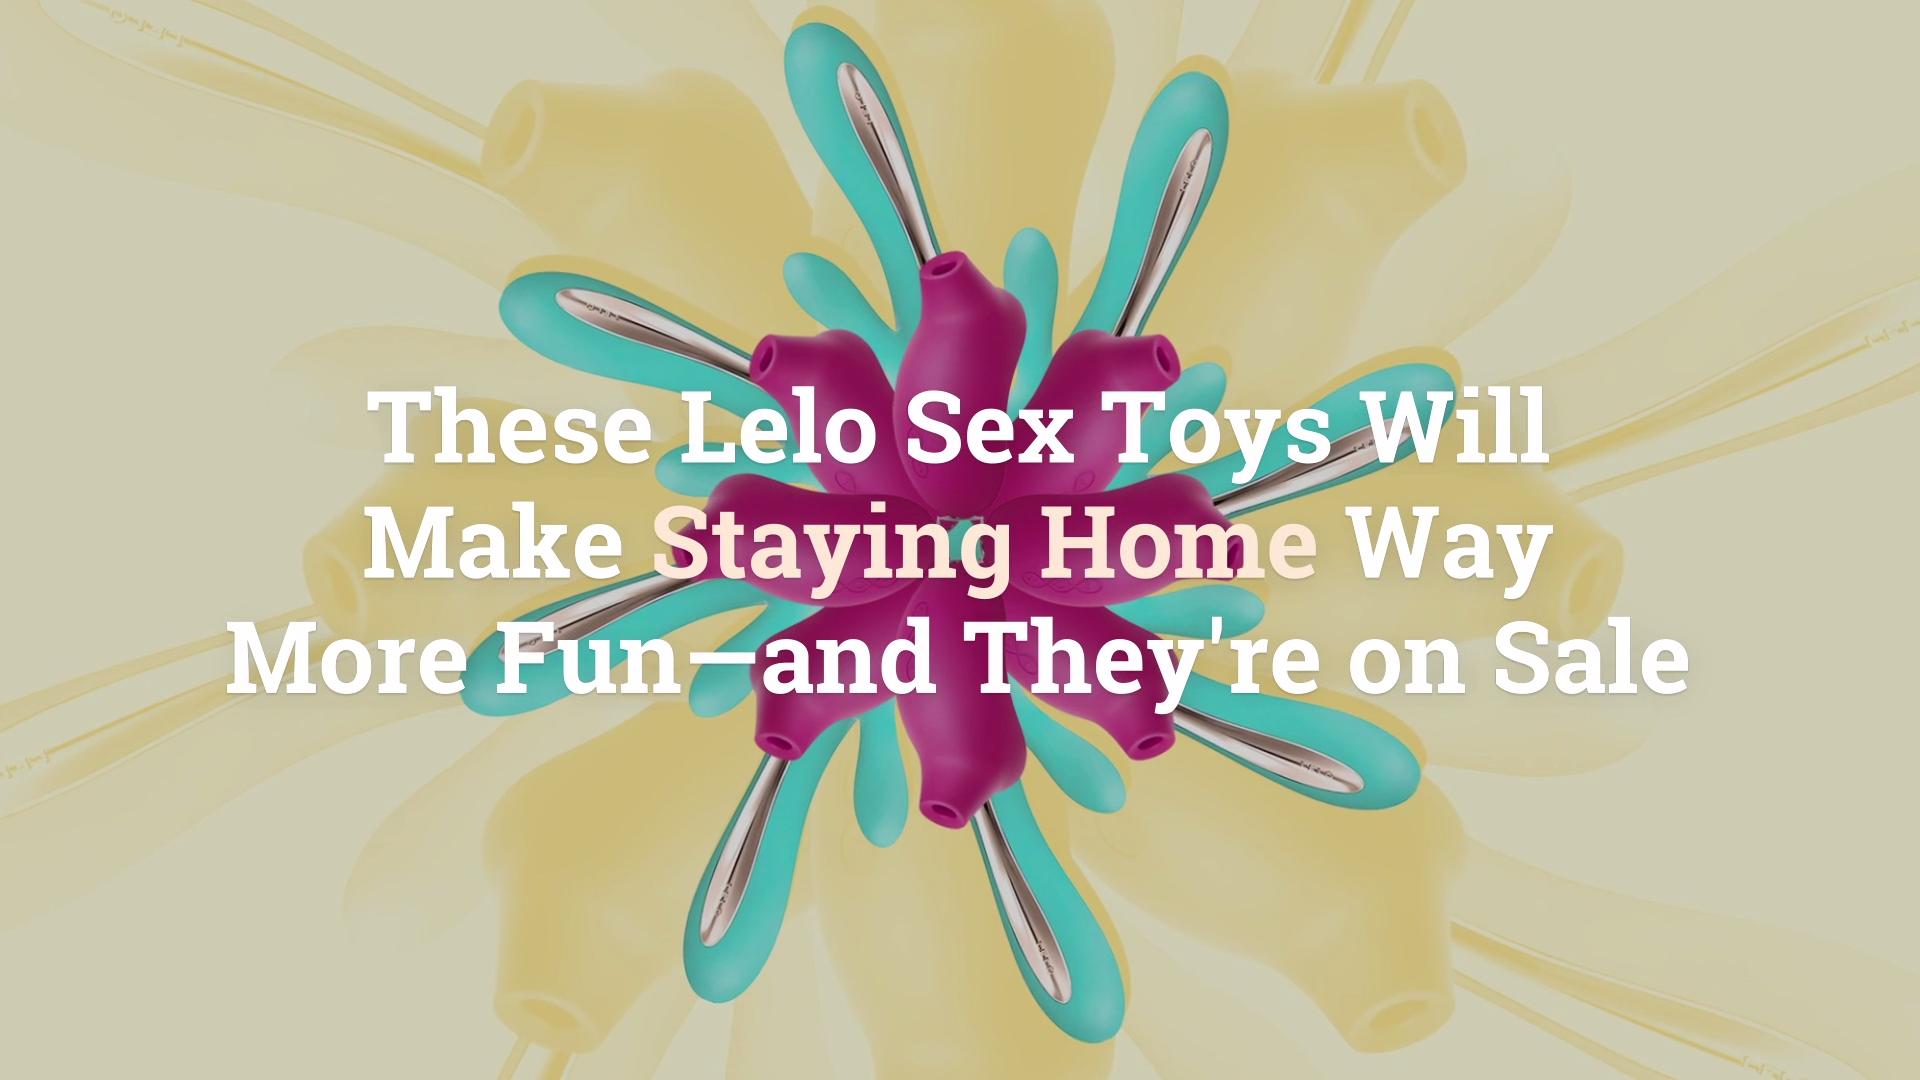 These Lelo Sex Toys Will Make Staying Home Way More Fun—and Theyre on Sale